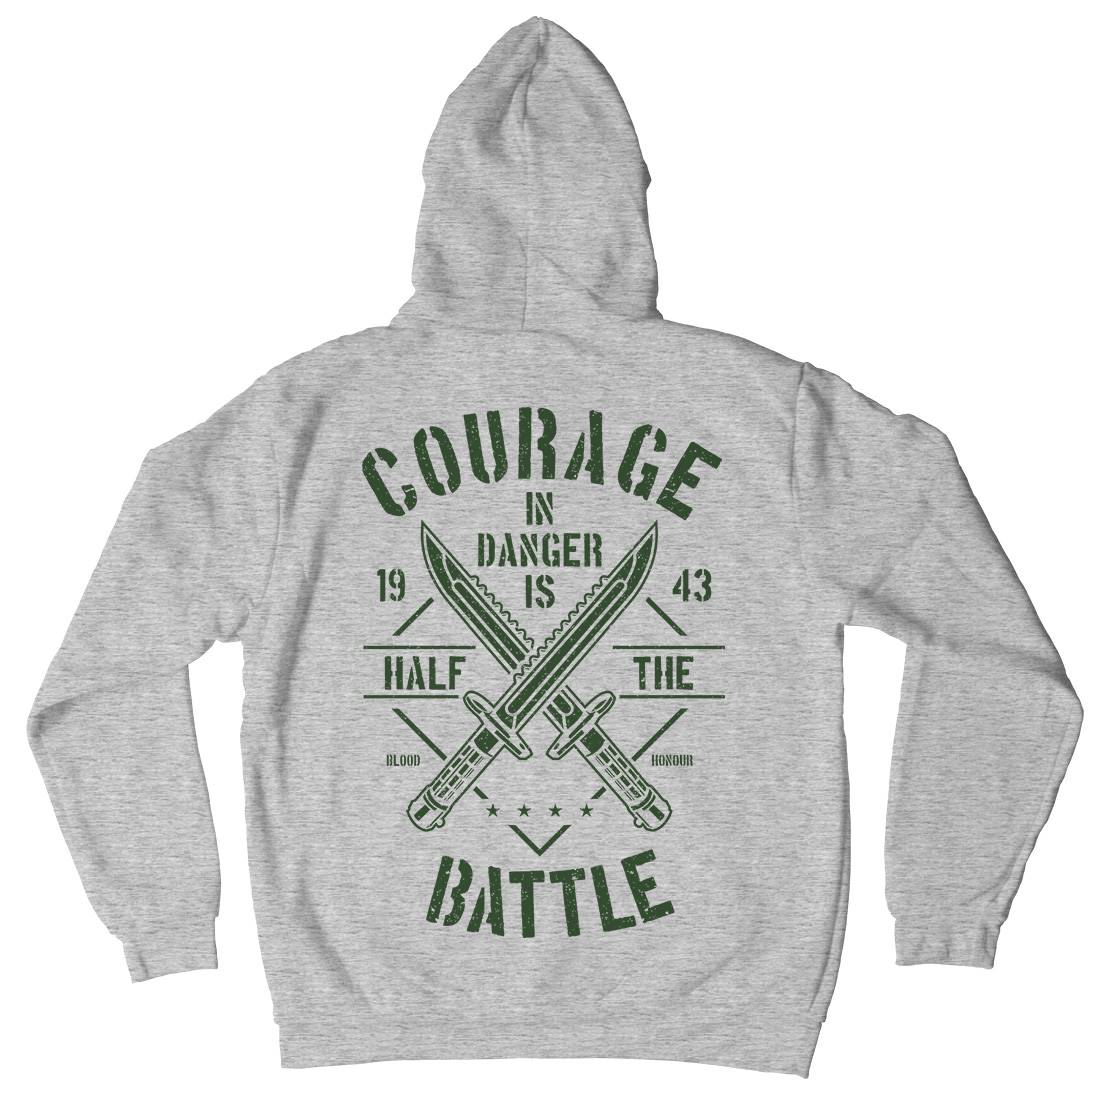 Courage In Danger Kids Crew Neck Hoodie Army A639